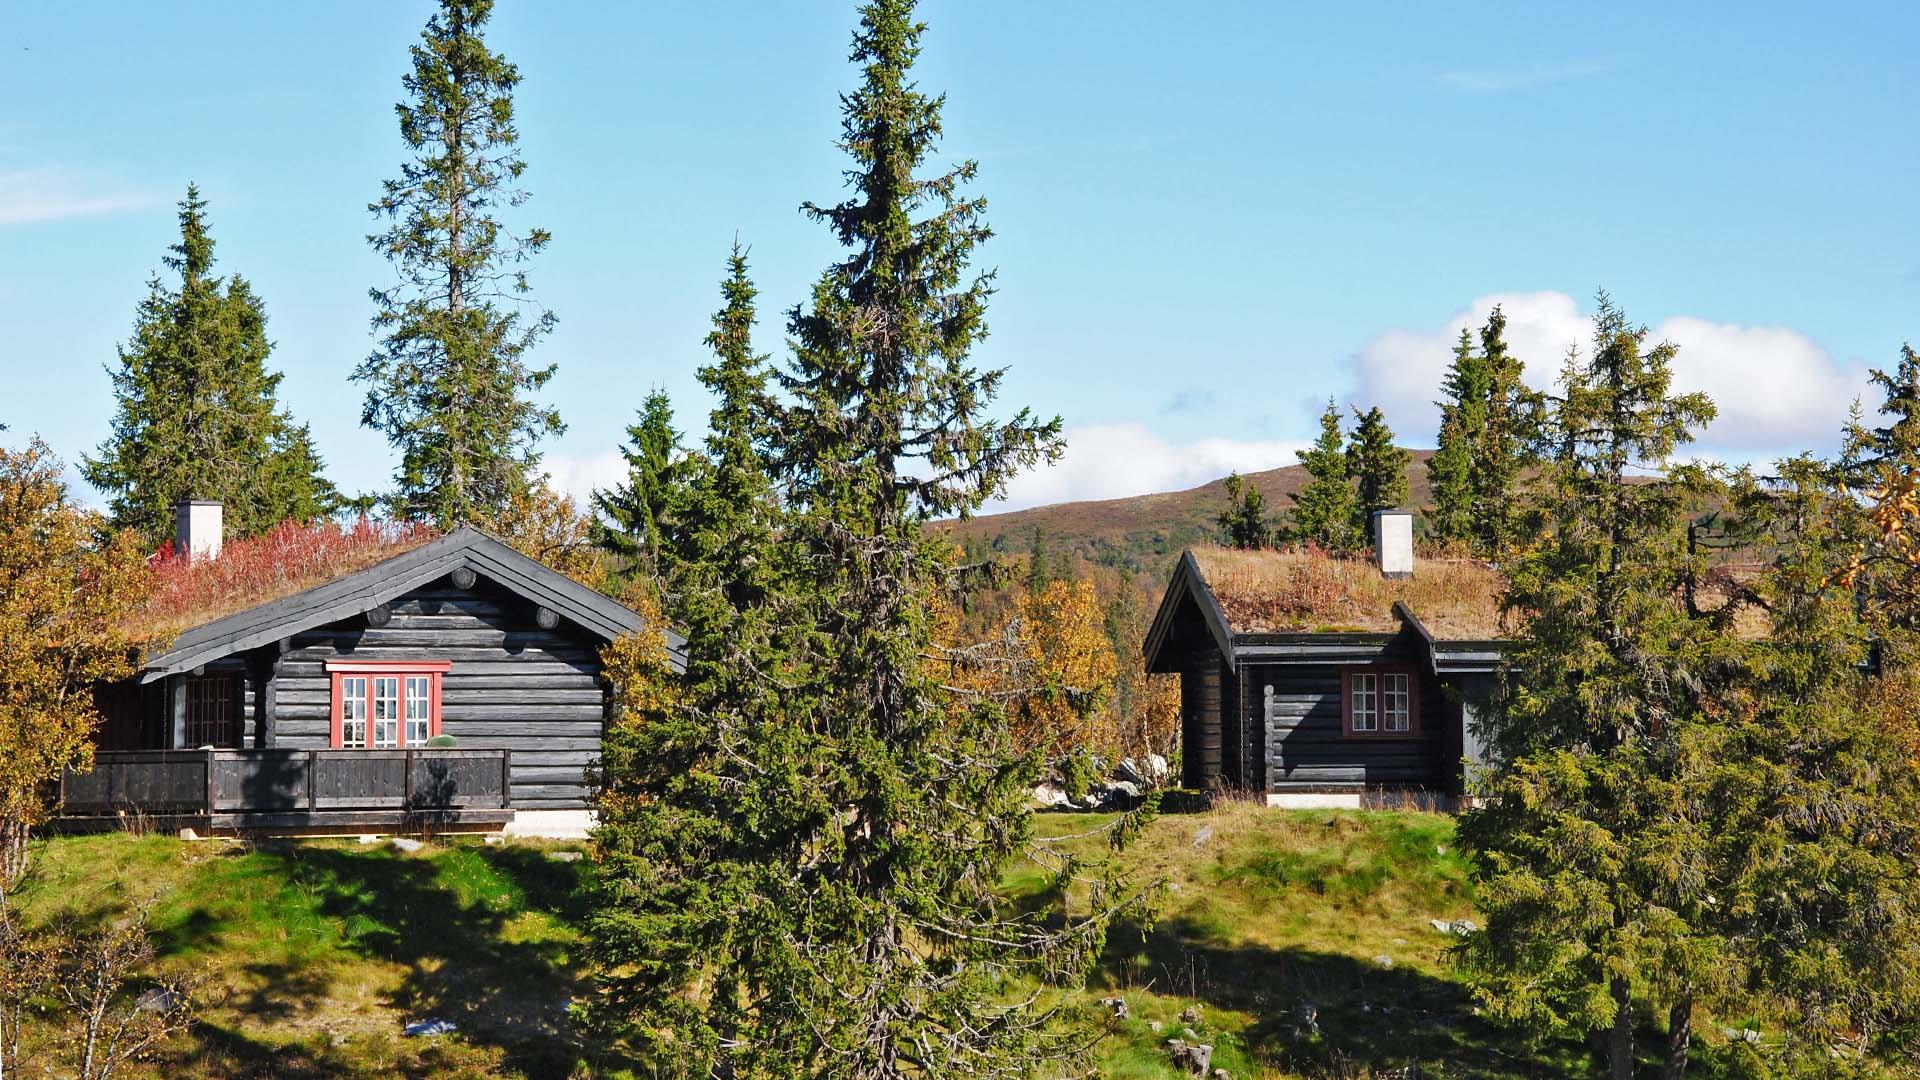 Two log cabins with grass roof in open spruce forest